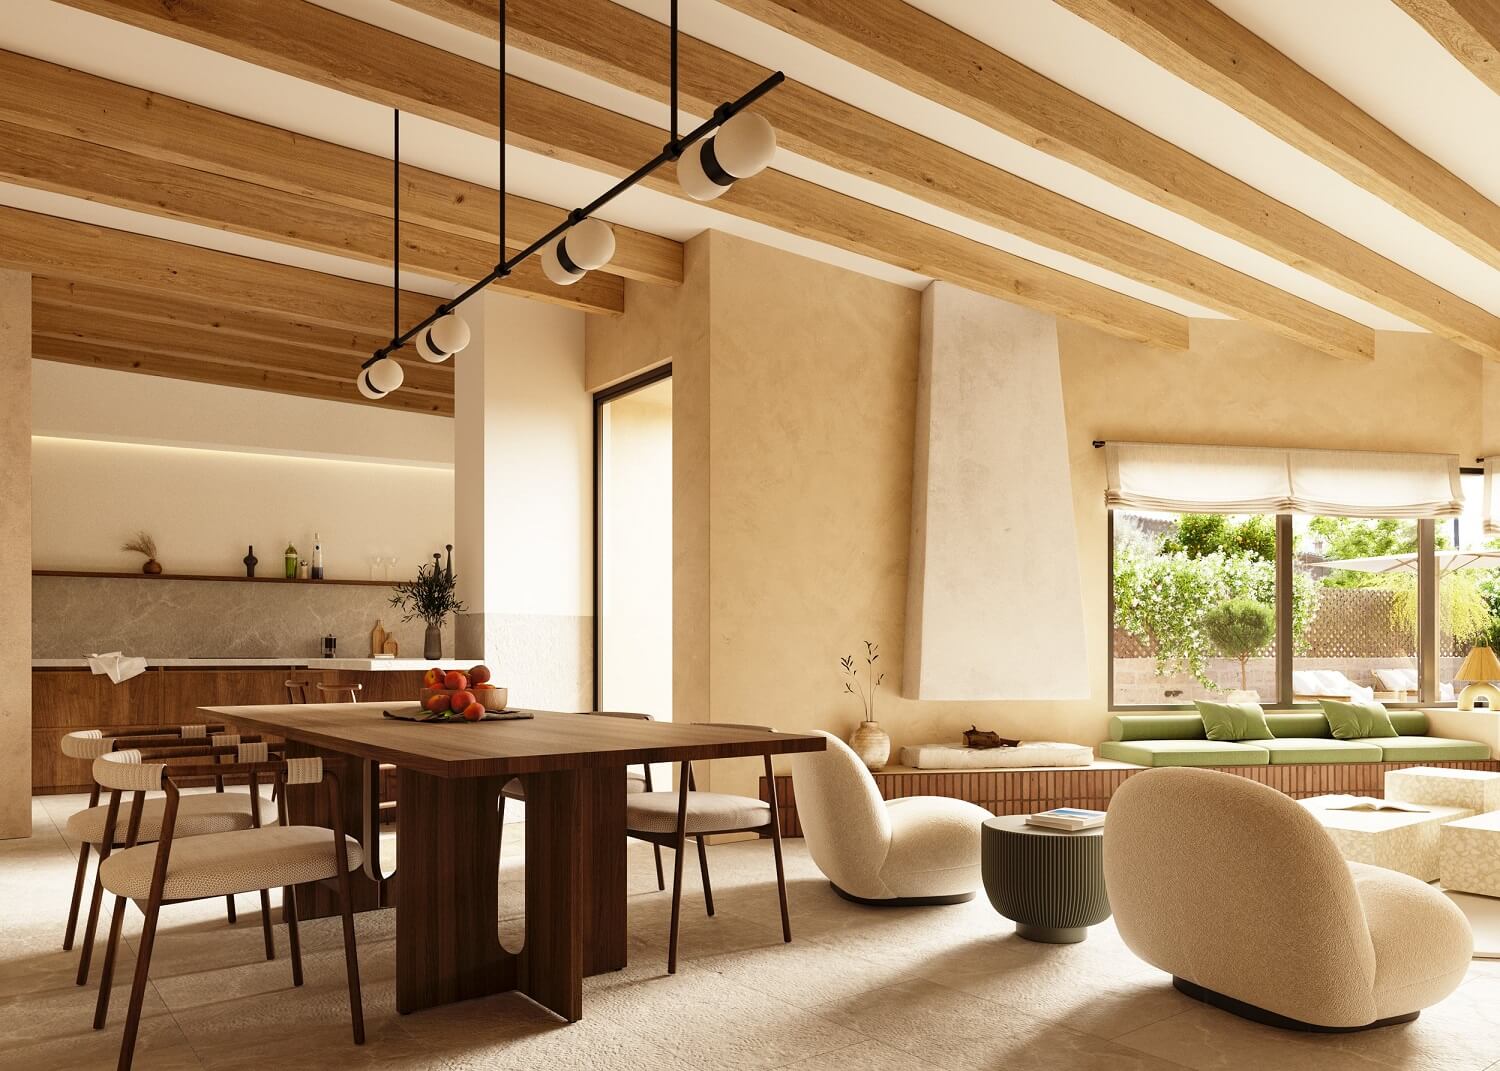 open-plan-living-space-kitchen-exposed-wooden-beams-townhouse-mallorca-nordroom